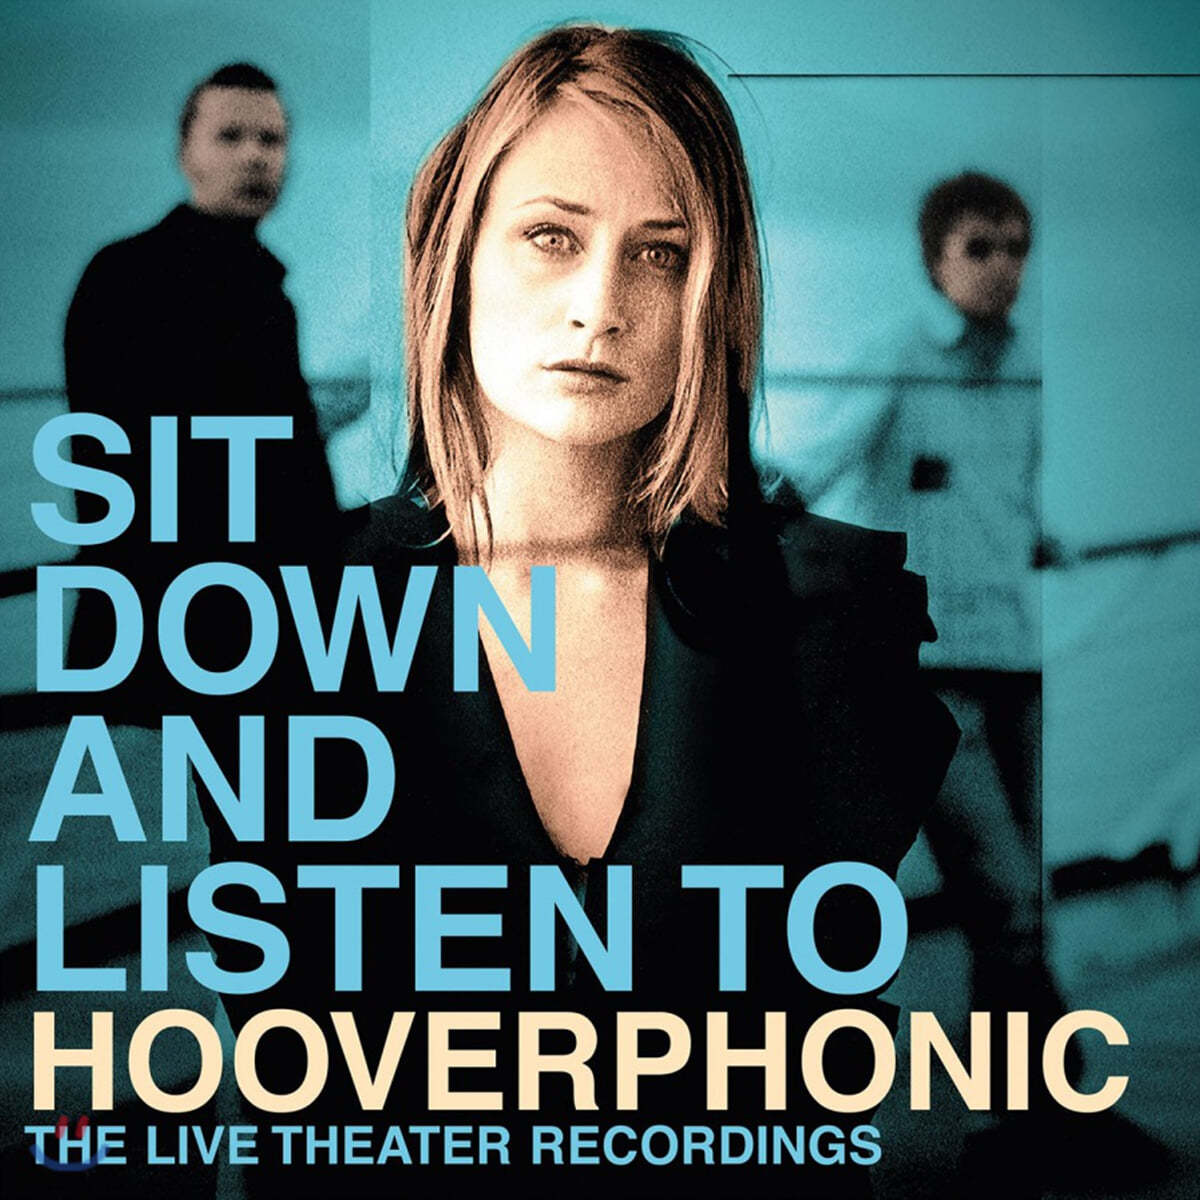 Hooverphonic (후버포닉) - Sit Down and Listen to Hooverphonic [2LP]